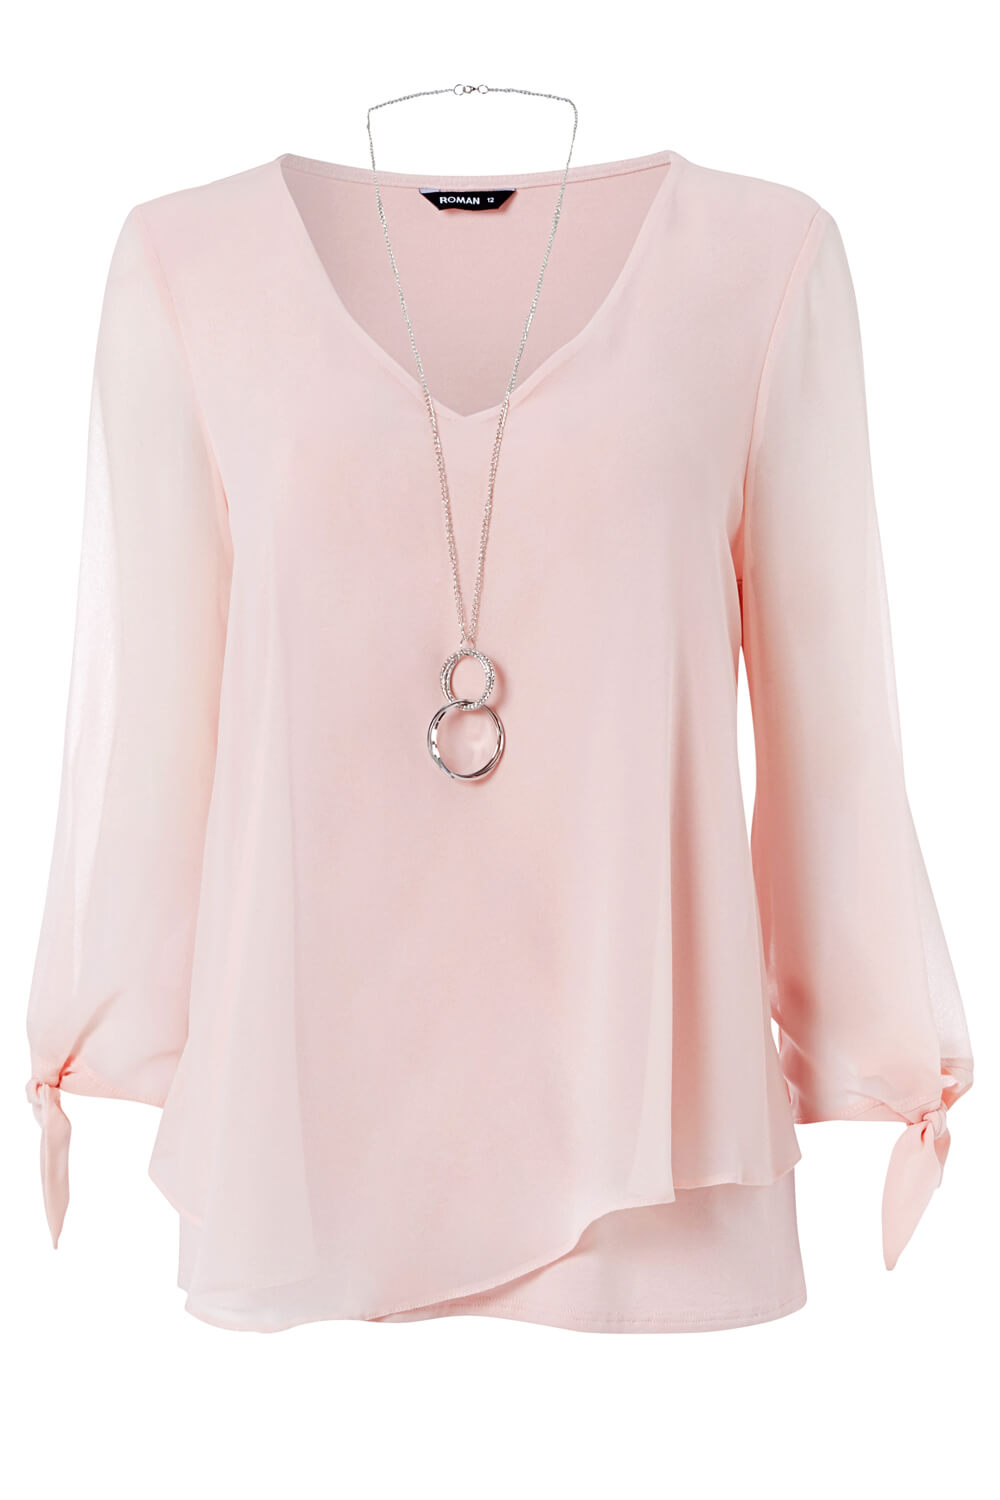 PINK Necklace Trim Jersey 3/4 Sleeve Chiffon Top, Image 4 of 4